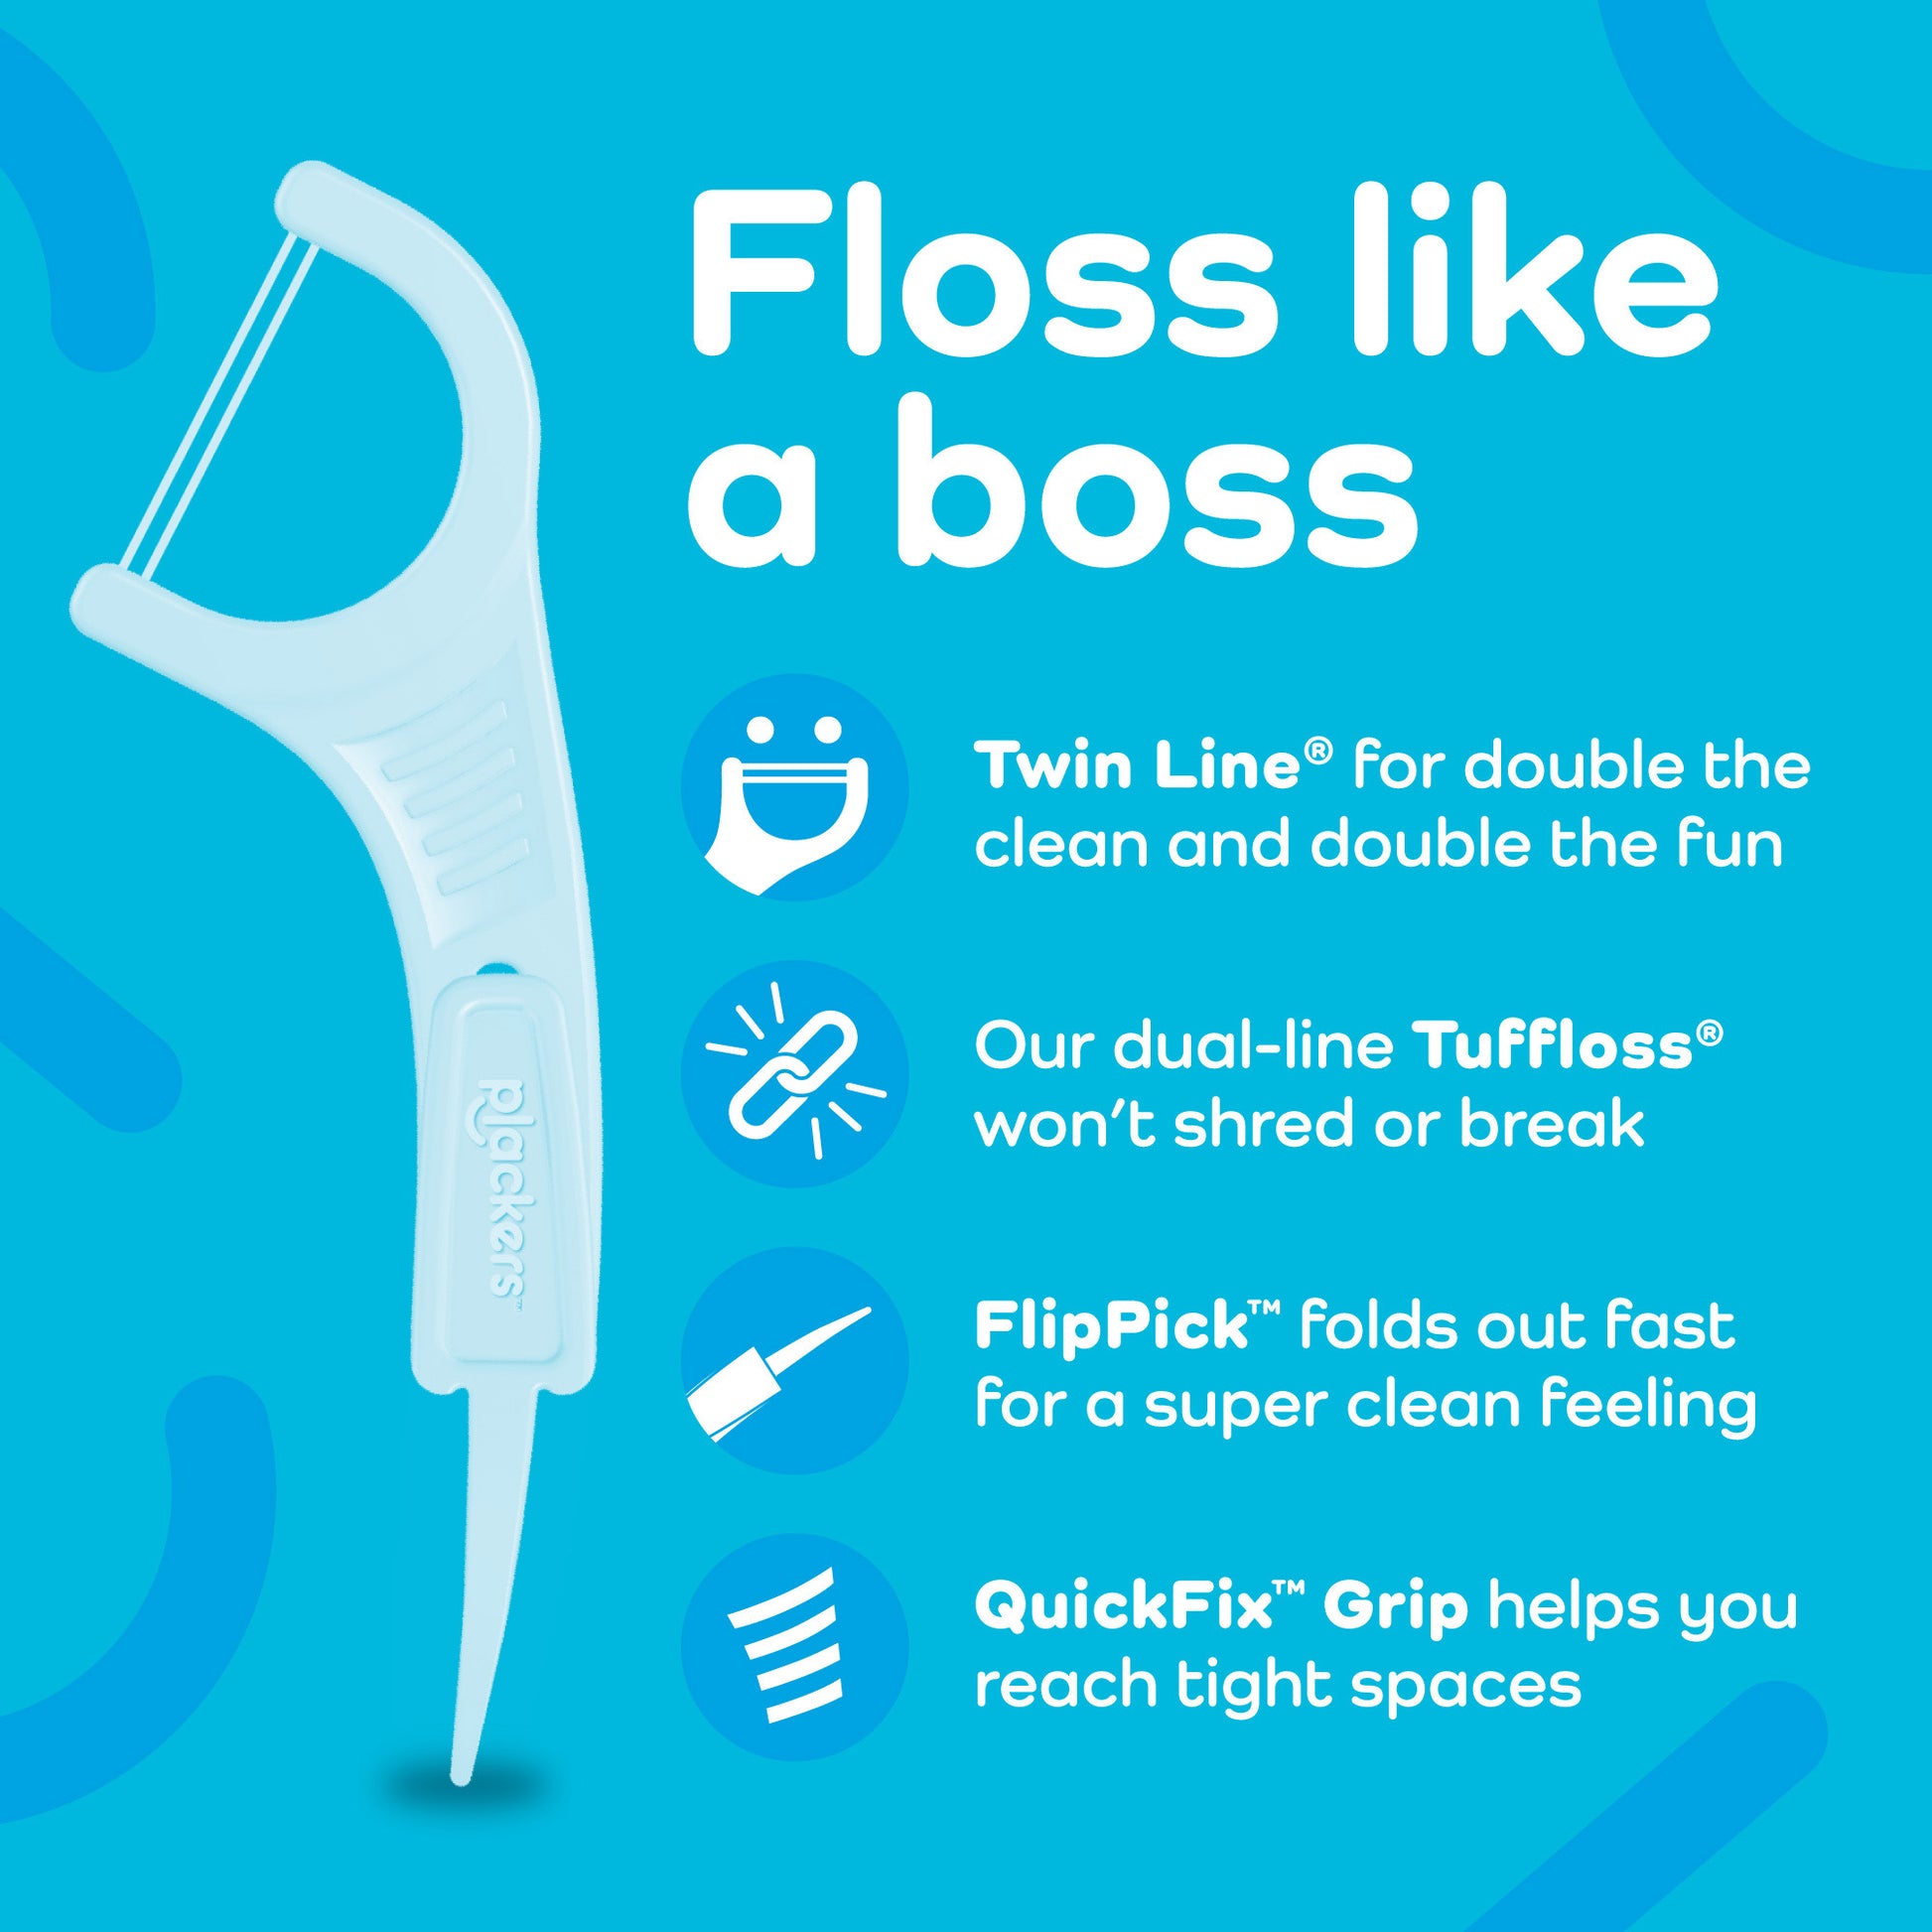 Floss like a boss. Twin line for double the clean and double the fun. Our dual-line Tuffloss won't shred or break. FlipPick folds out fast for a super clean feeling. QuickFix Grip helps you reach tight spaces